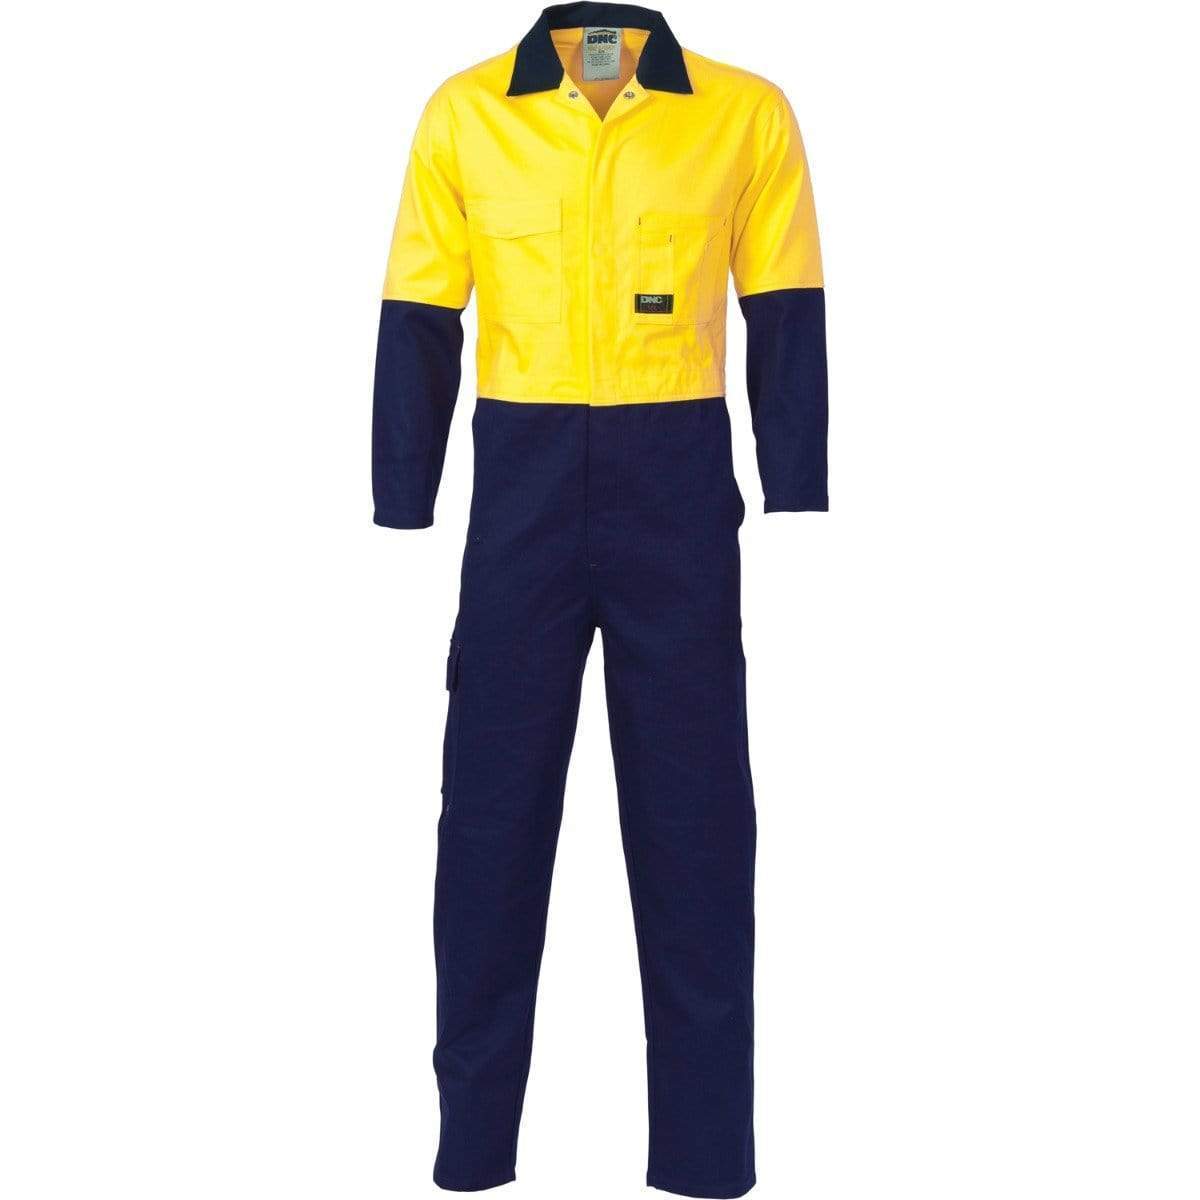 Dnc Workwear Hi-vis Two-tone Cotton Coverall - 3851 Work Wear DNC Workwear Yellow/Navy 77R 